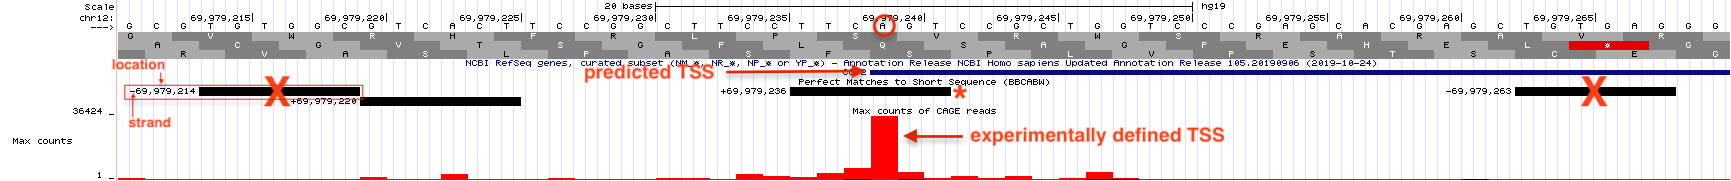 Horizonatal black bars within the 'Short Match' evidence track describe the position of each consensus sequence (BBCA(+1)BW) found within this genomic region. Information about the precise nucleotide position and orientation is provided on the left (see boxed consensus on the left). The putative Inr for CCT2 is highlighted with a red asterix. This consensus sequence is found on the plus strand (same as CCT2) and is positioned directly below the experimentally defined TSS at 69,979,236 with the A at the putative +1 position.